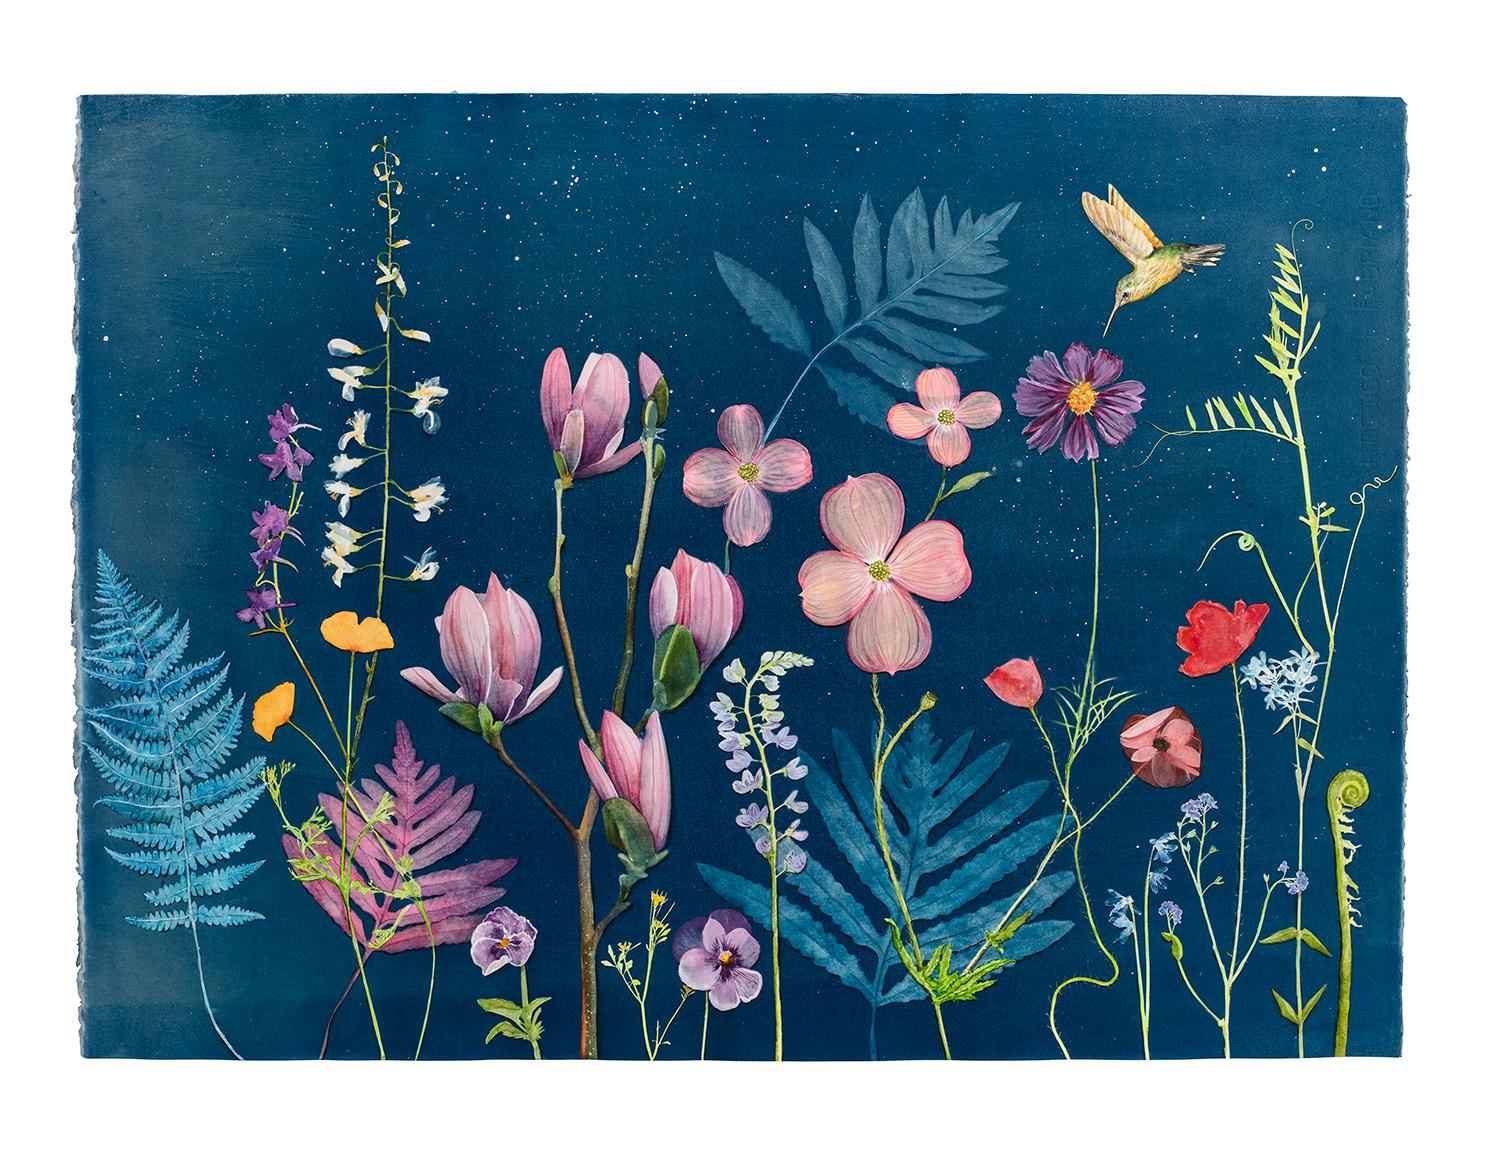 Nocturnal Nature (Still Life Cyanotype Painting of Pink Flowers on Blue, Framed) - Contemporary Mixed Media Art by Julia Whitney Barnes